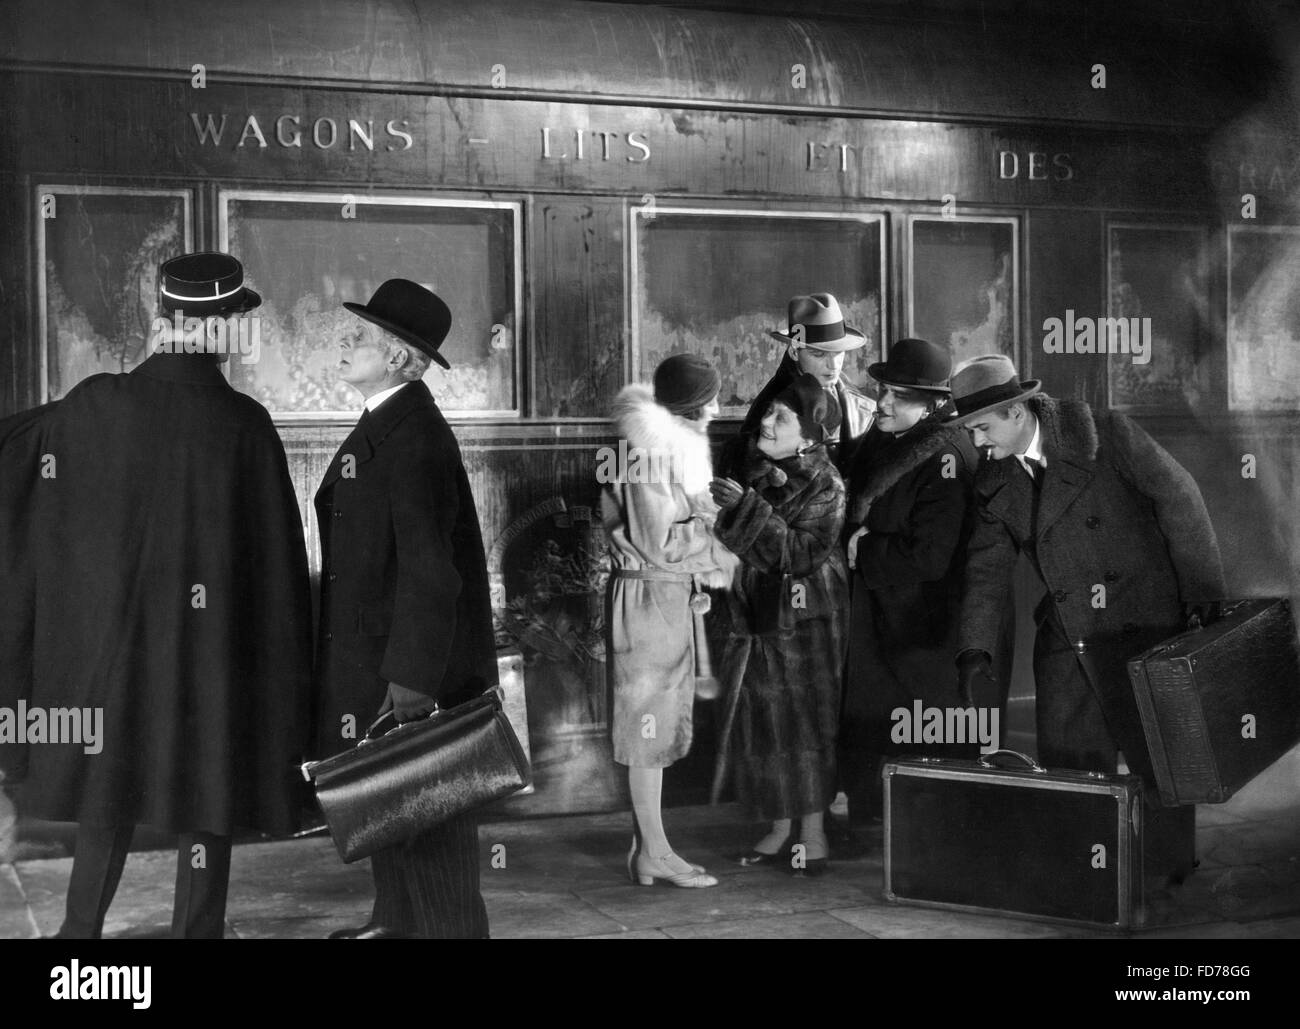 Farewell scene at the train station in the 1920s Stock Photo